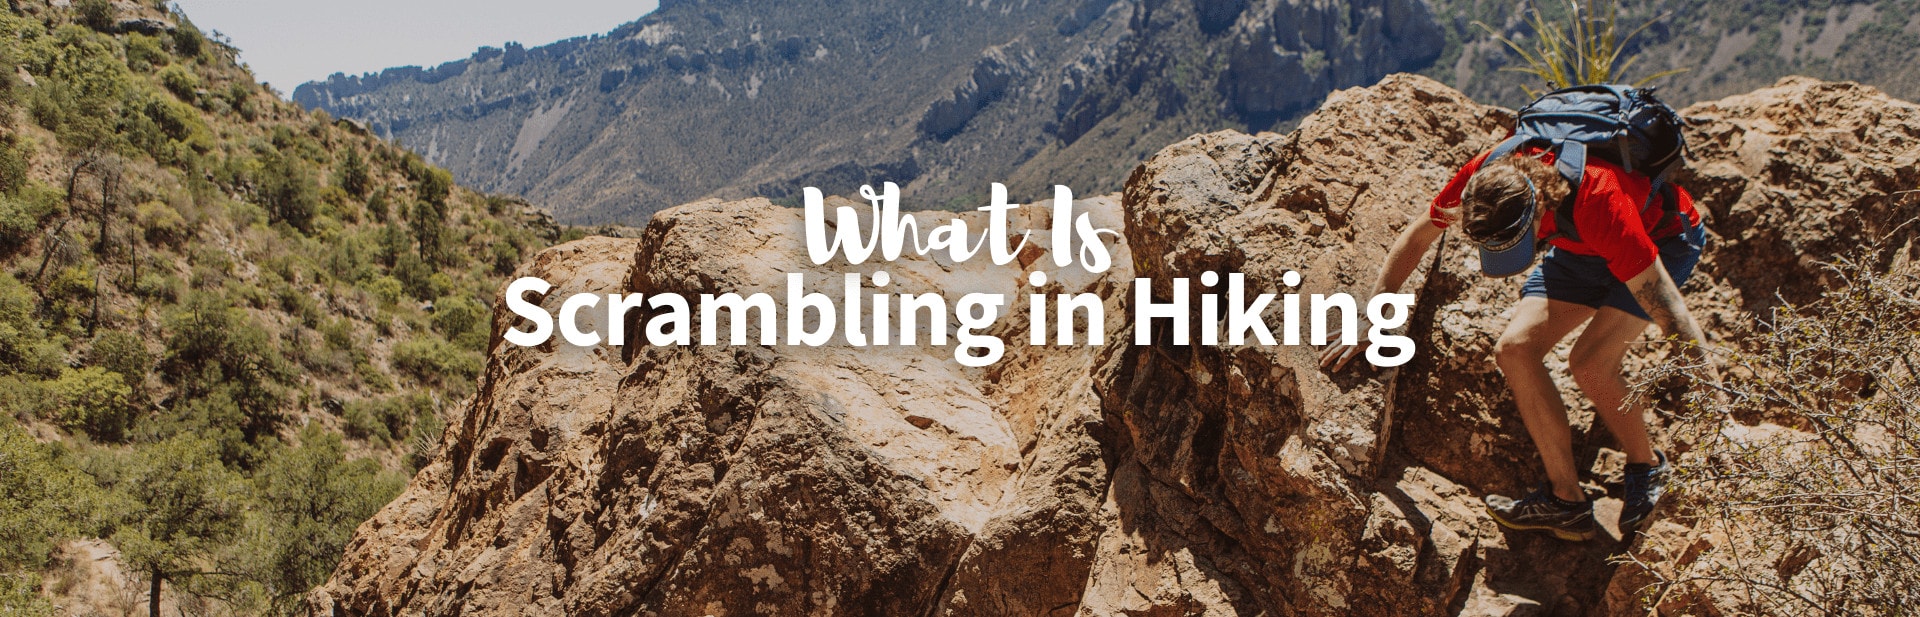 Scrambling in Hiking: The Perfect Blend of Hiking and Rock Climbing Adventure